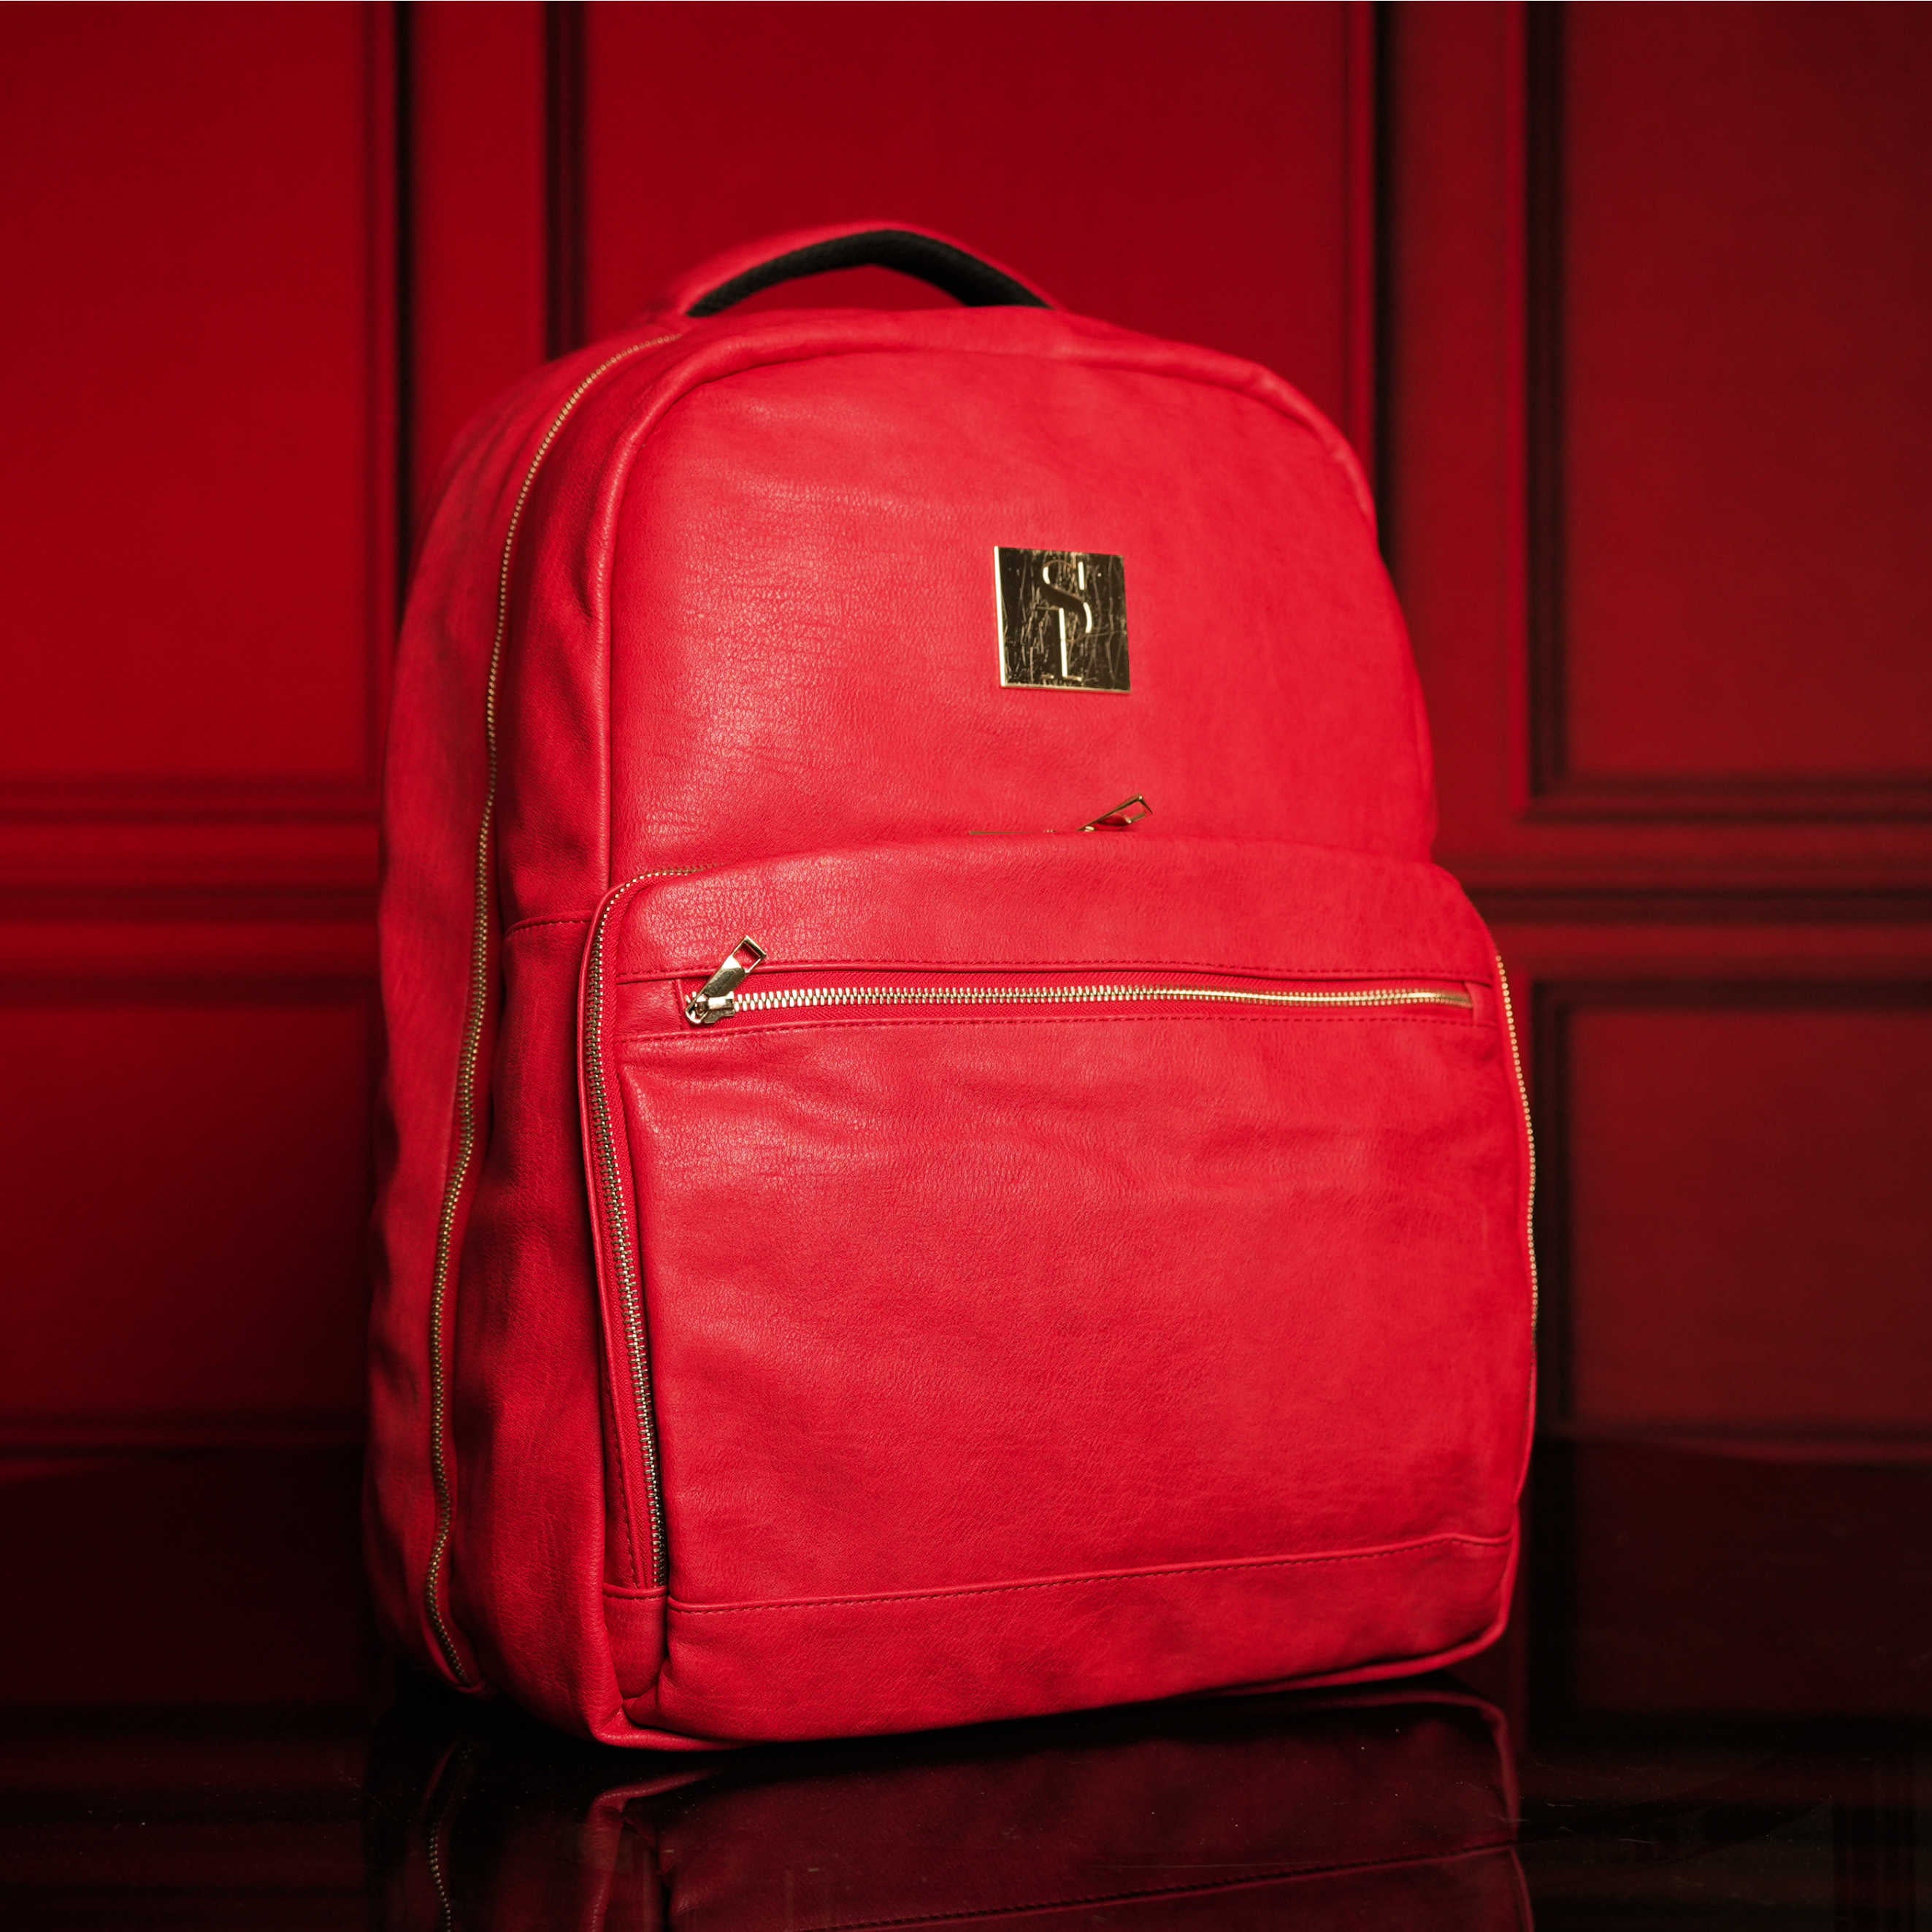 Red Tumbled Leather Daily Commuter Bag